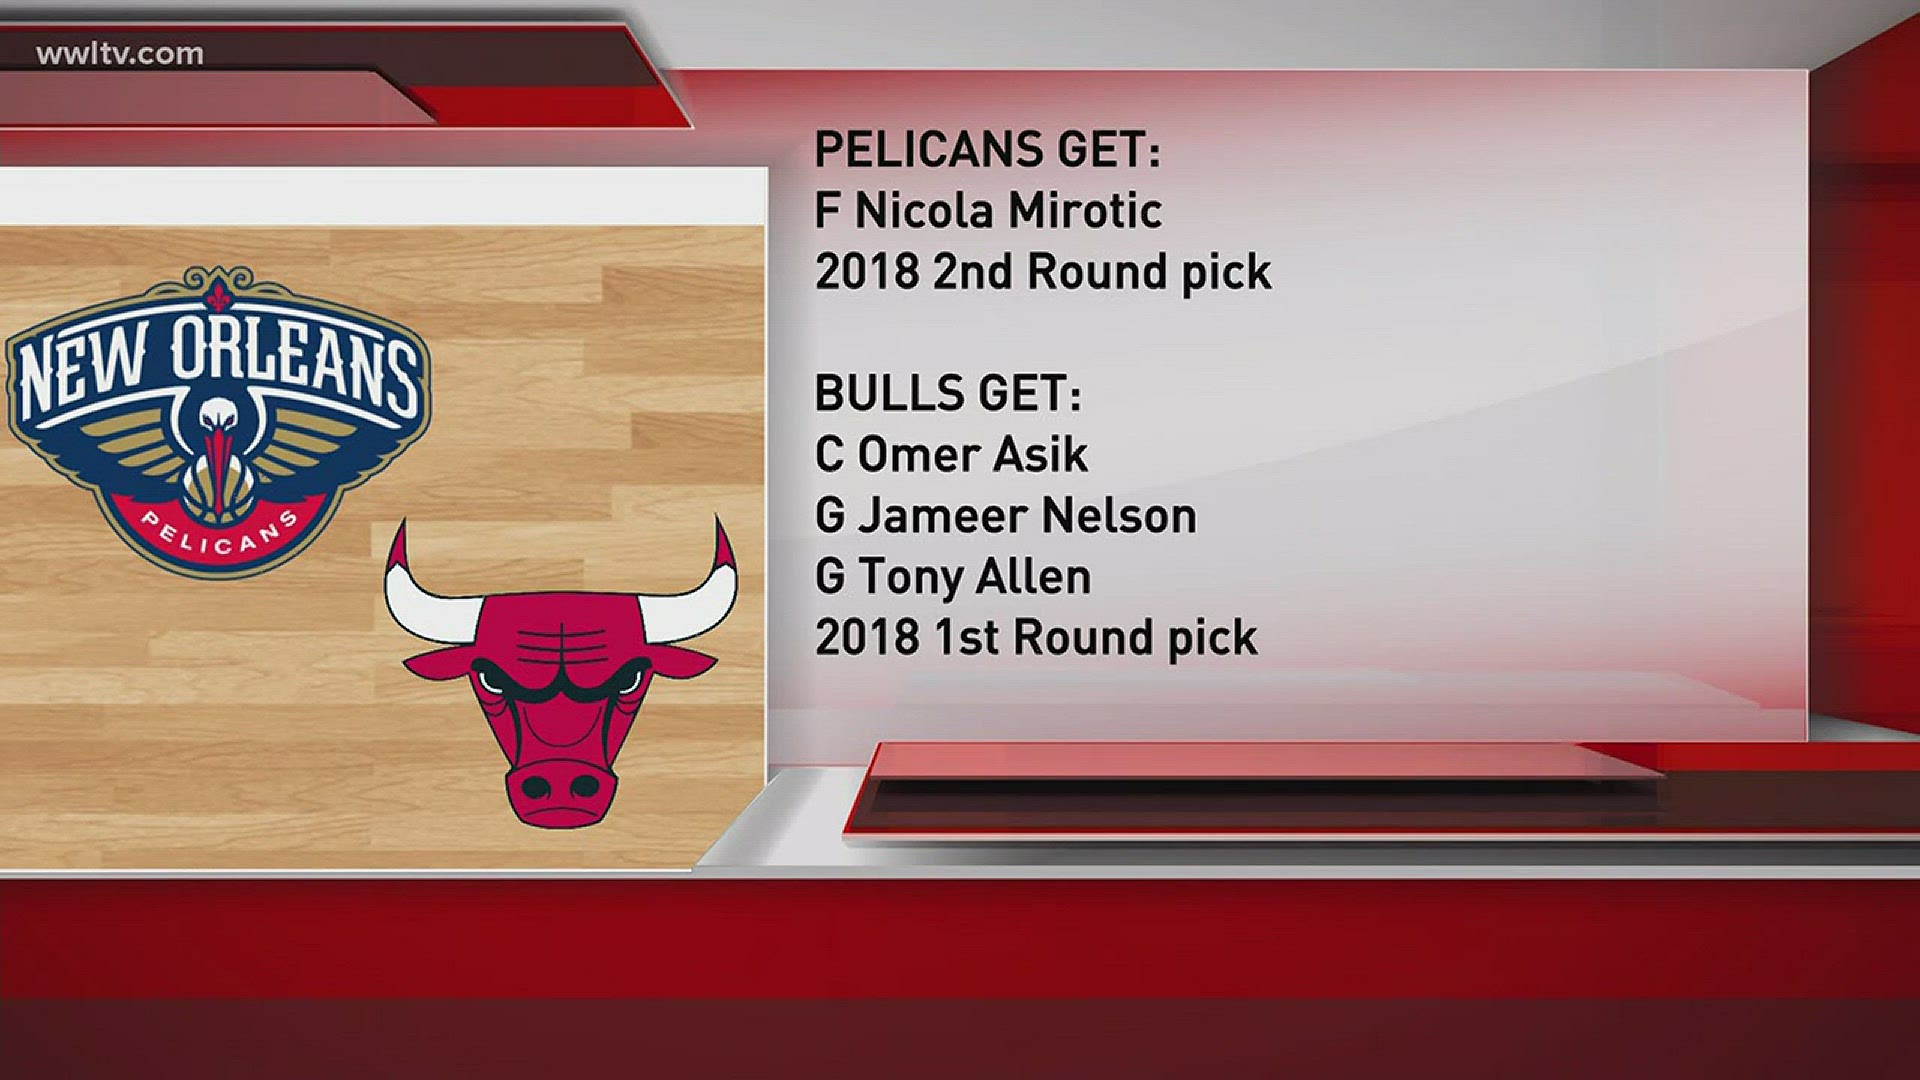 In exchange, the Pelicans will send Chicago their first round pick for the 2018 draft, along with Asik and guards Jameer Nelson and Tony Allen.